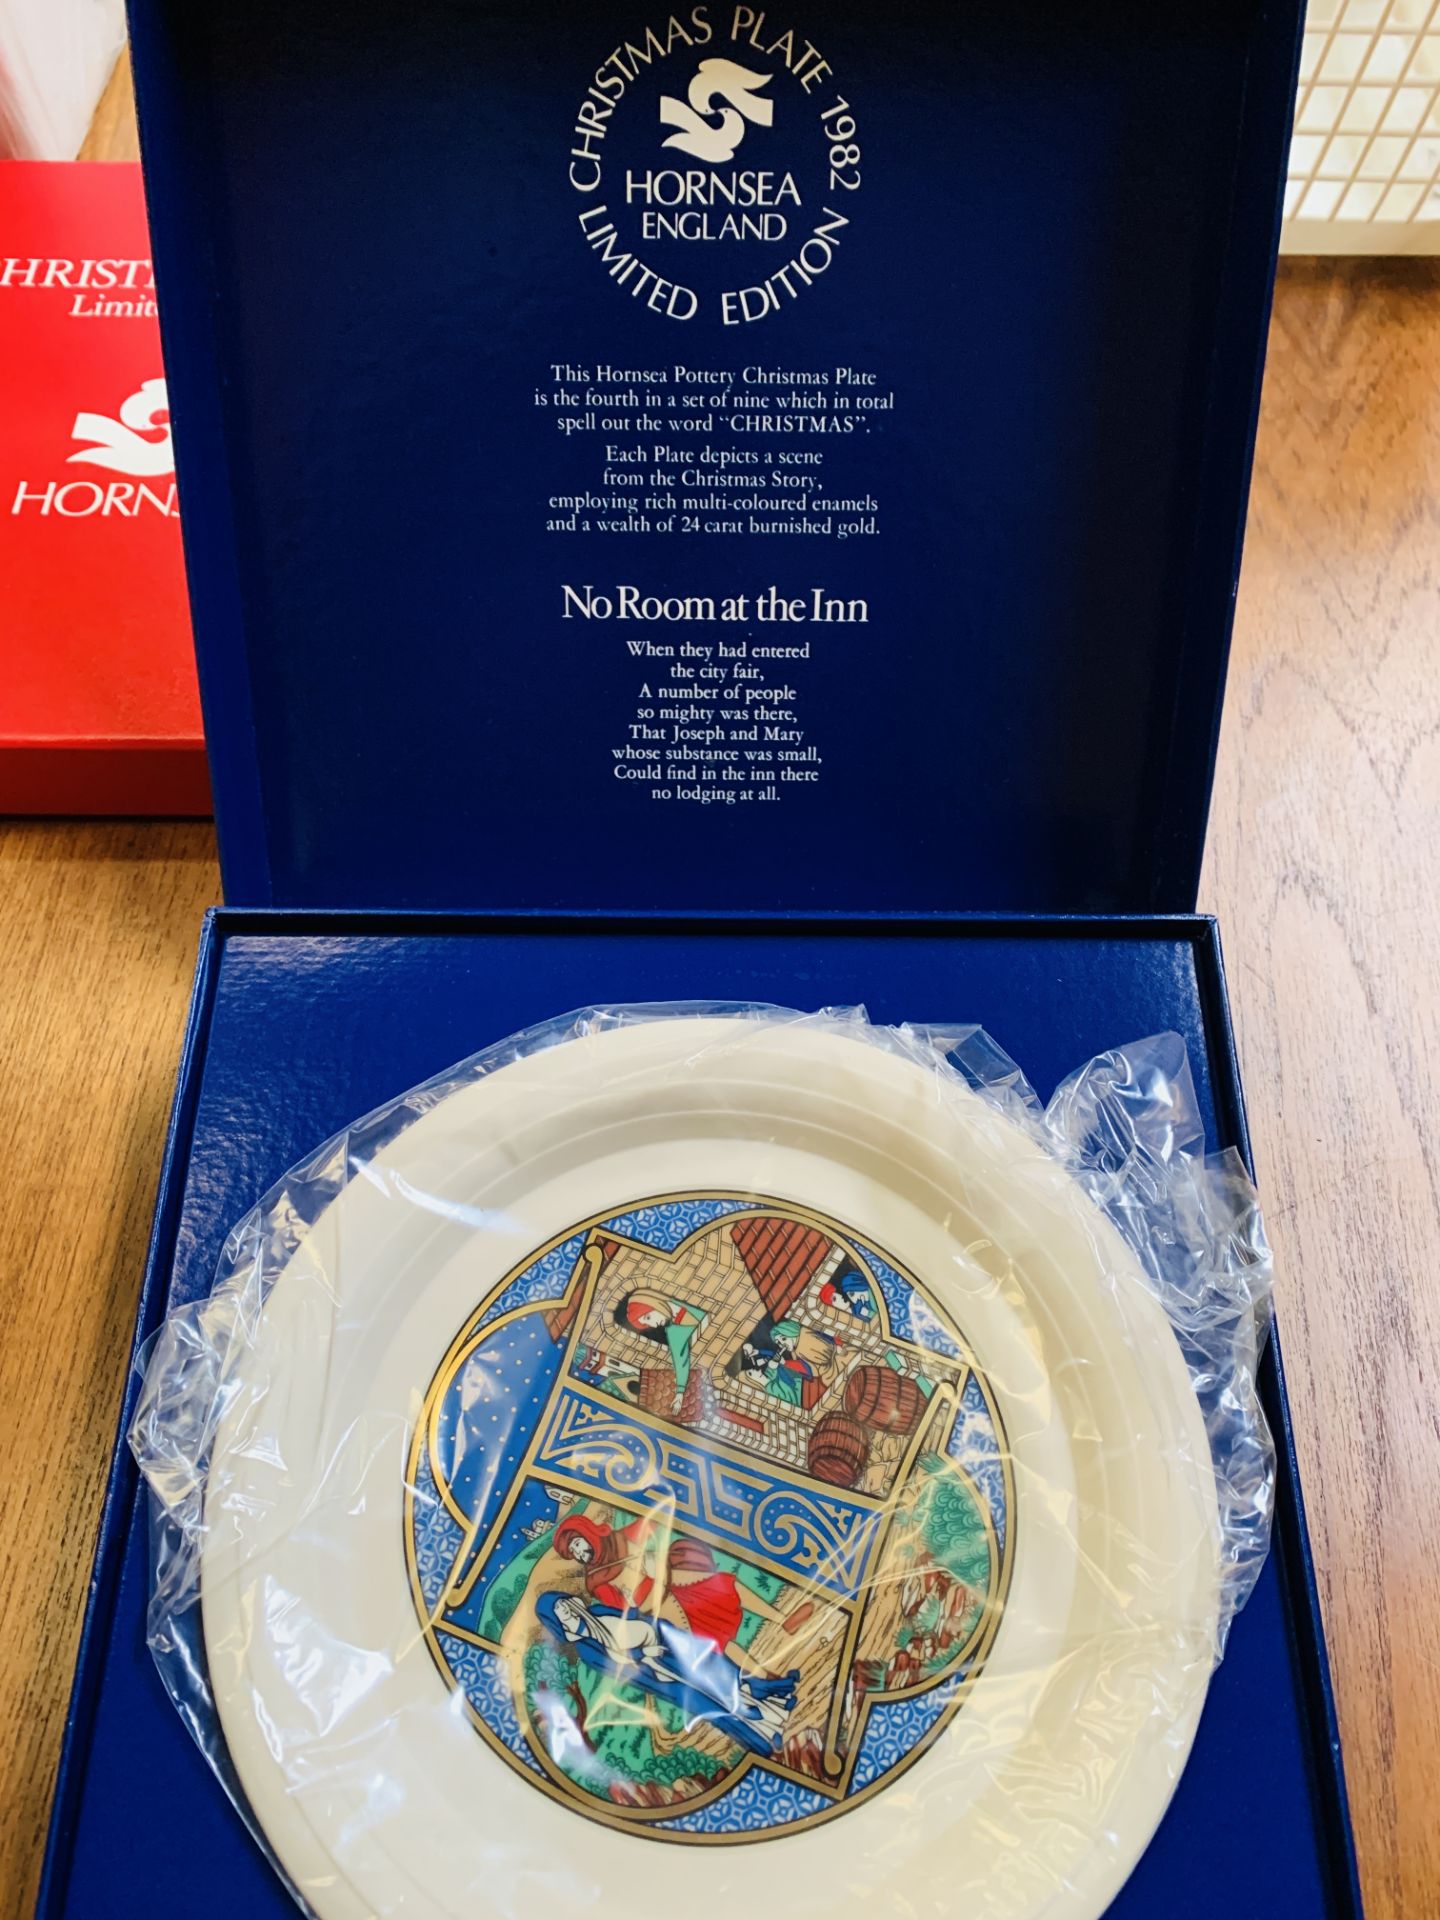 Complete set of nine Hornsea Limited Edition Christmas Plates.